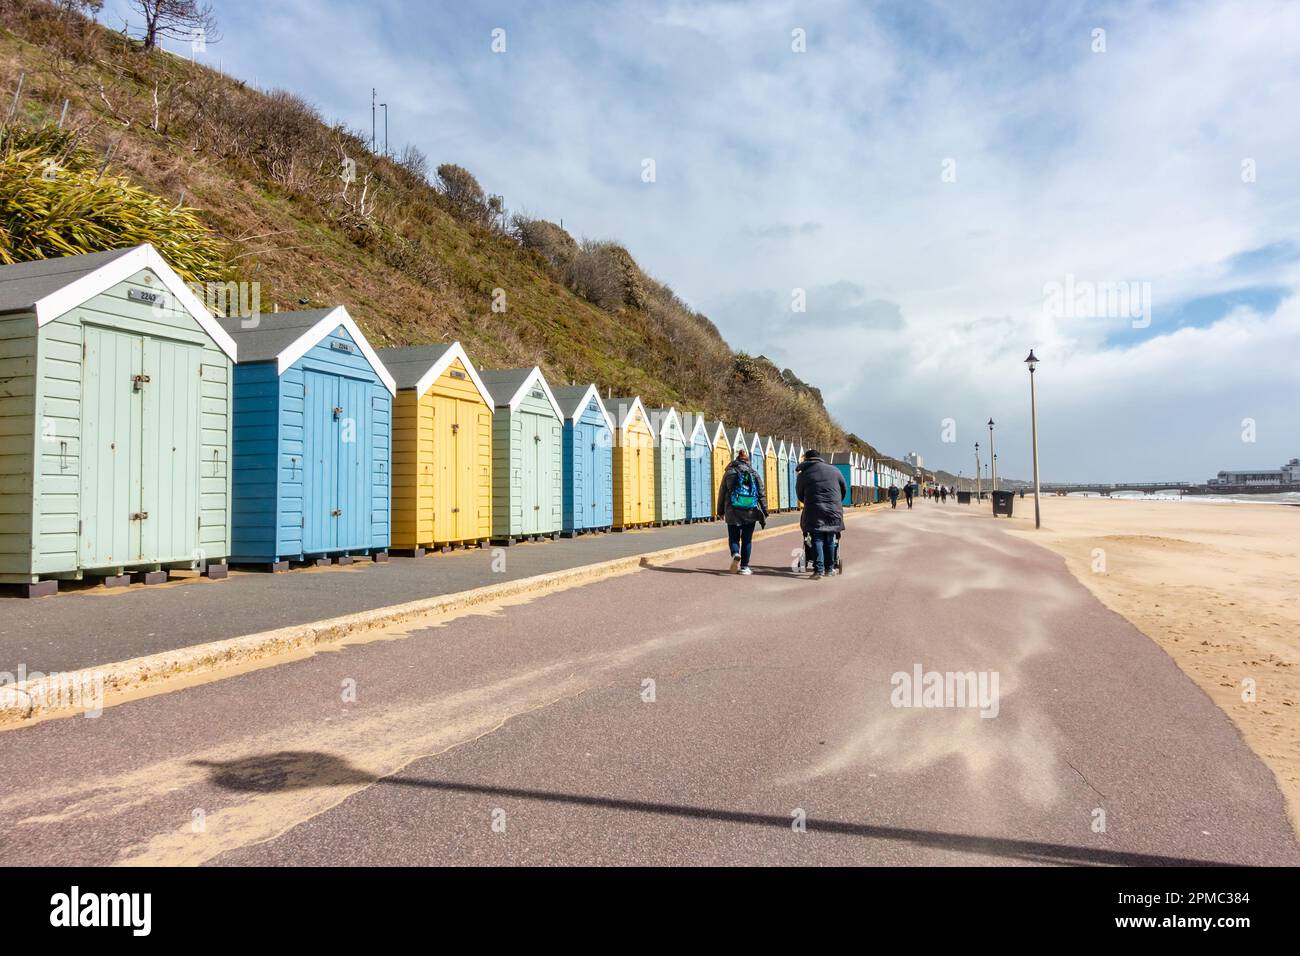 People walk along a path in front of beach huts on Bournemouth Beach in Dorset, UK under a stormy, grey sky with sand blowing in the wind Stock Photo